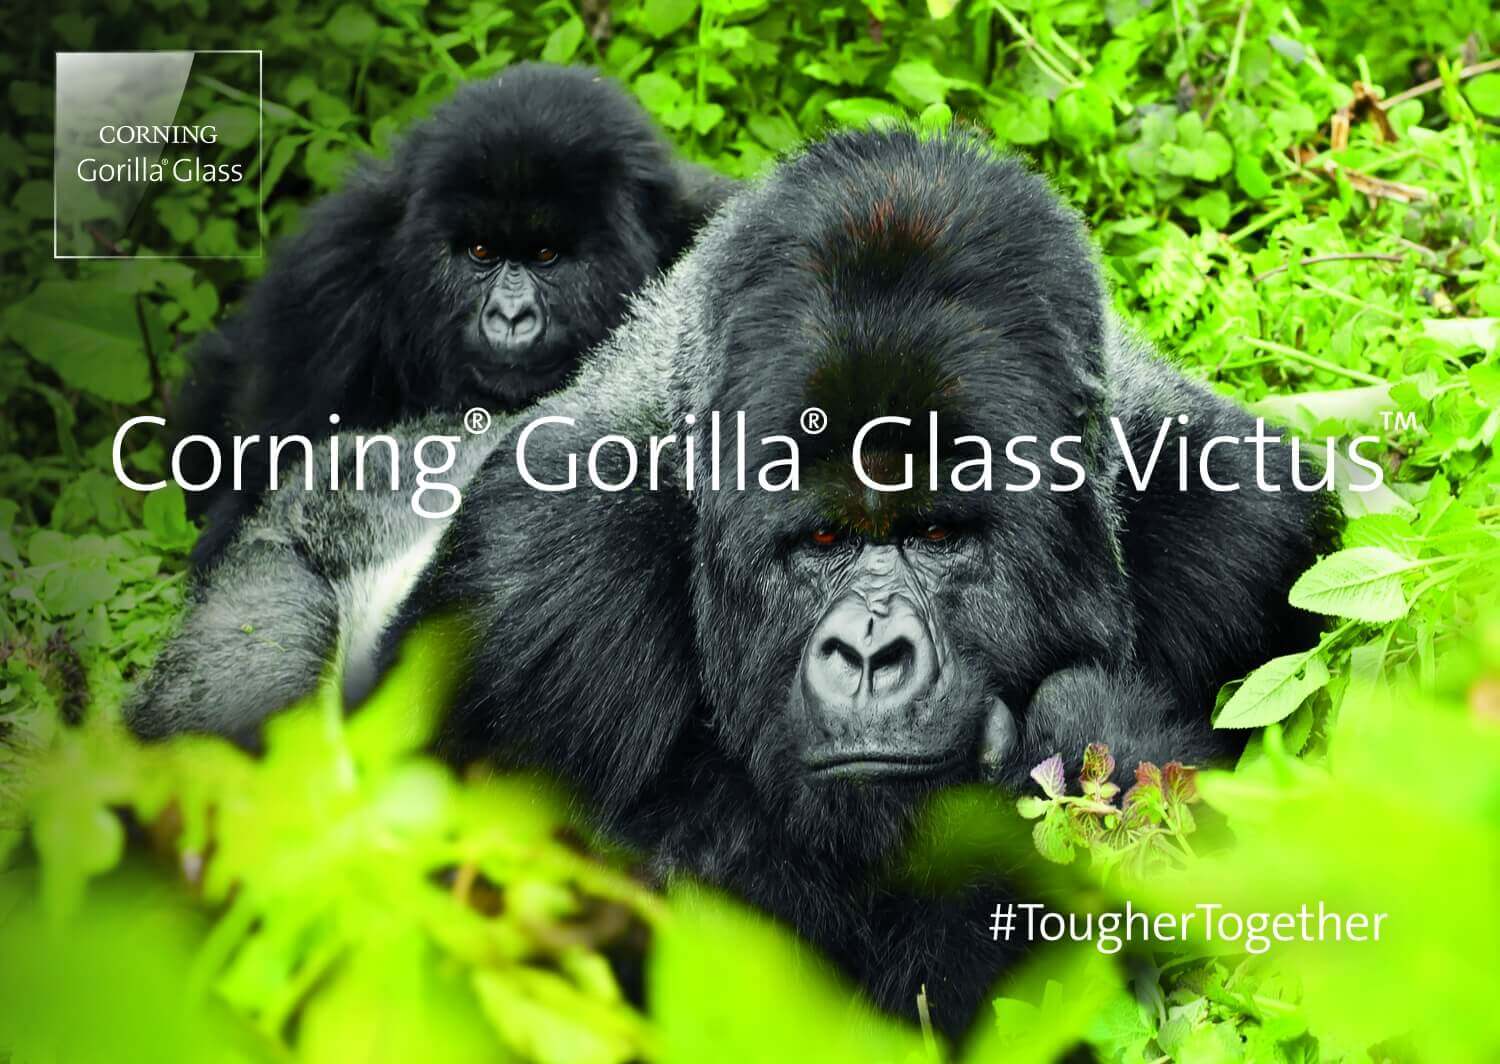 Corning's new Gorilla Glass Victus is 2x more scratch resistant than Gorilla Glass 6